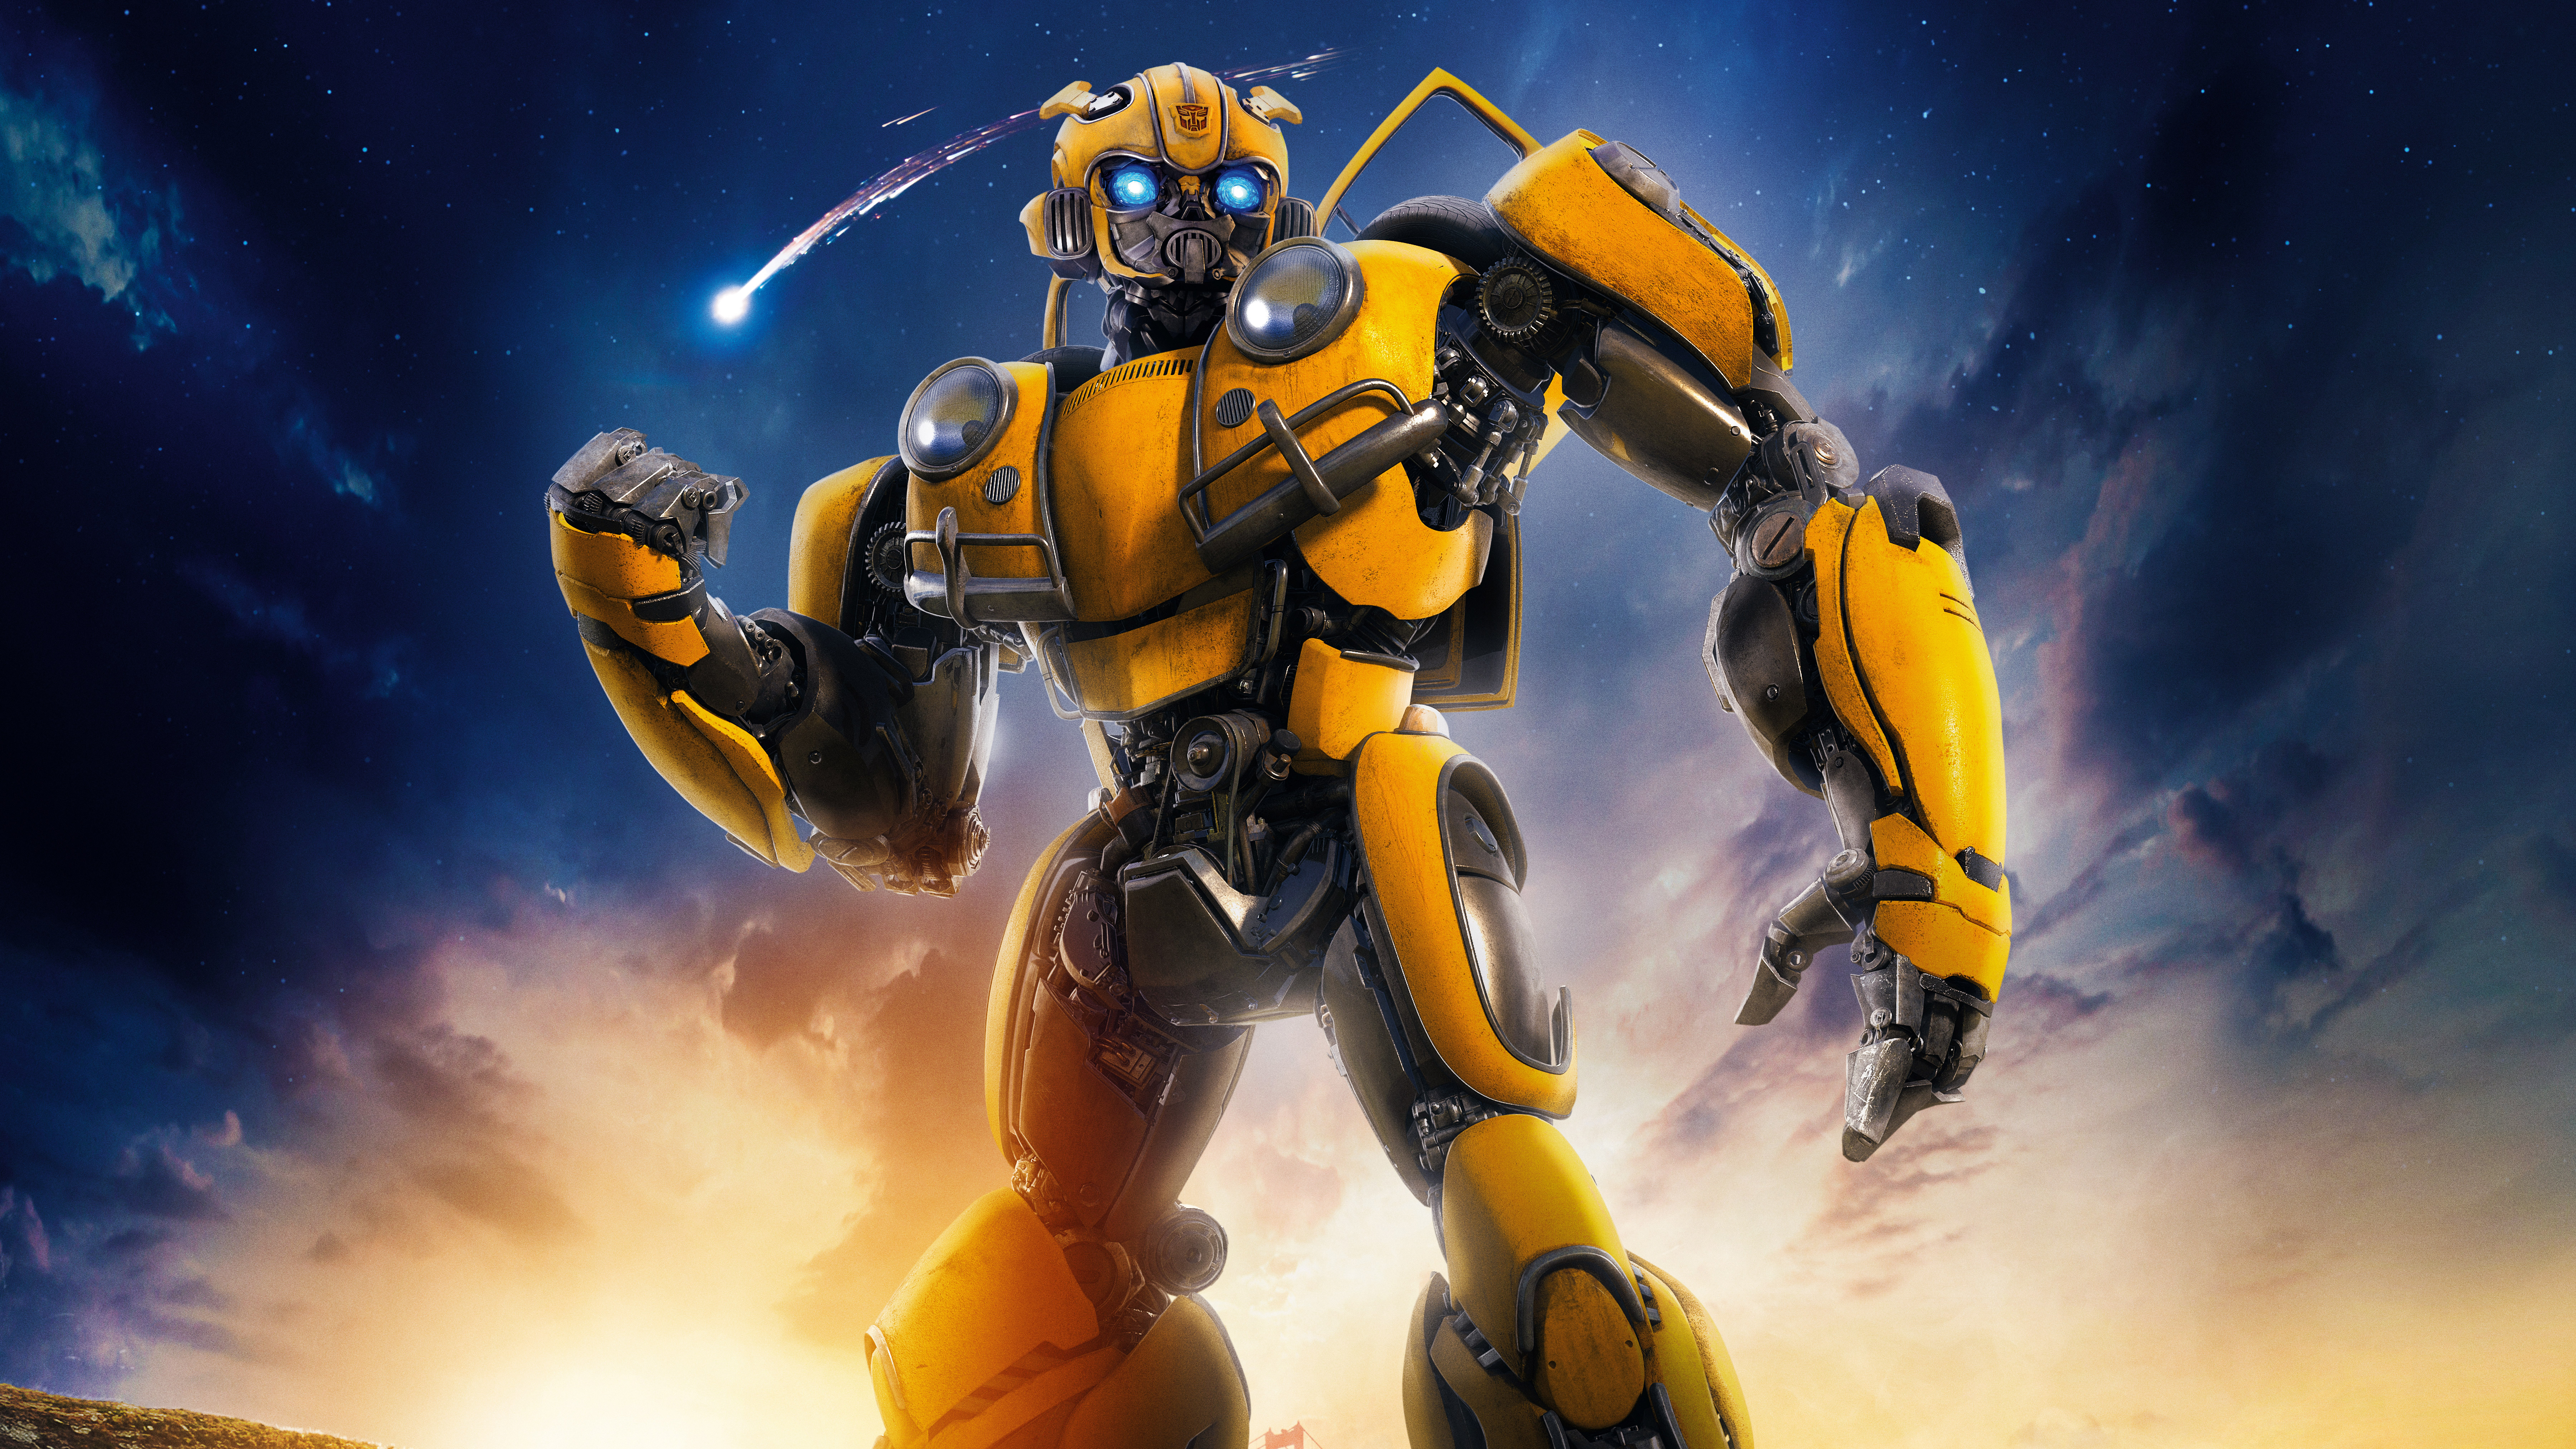 Shatter And Dropkick In Bumblebee Movie Wallpapers